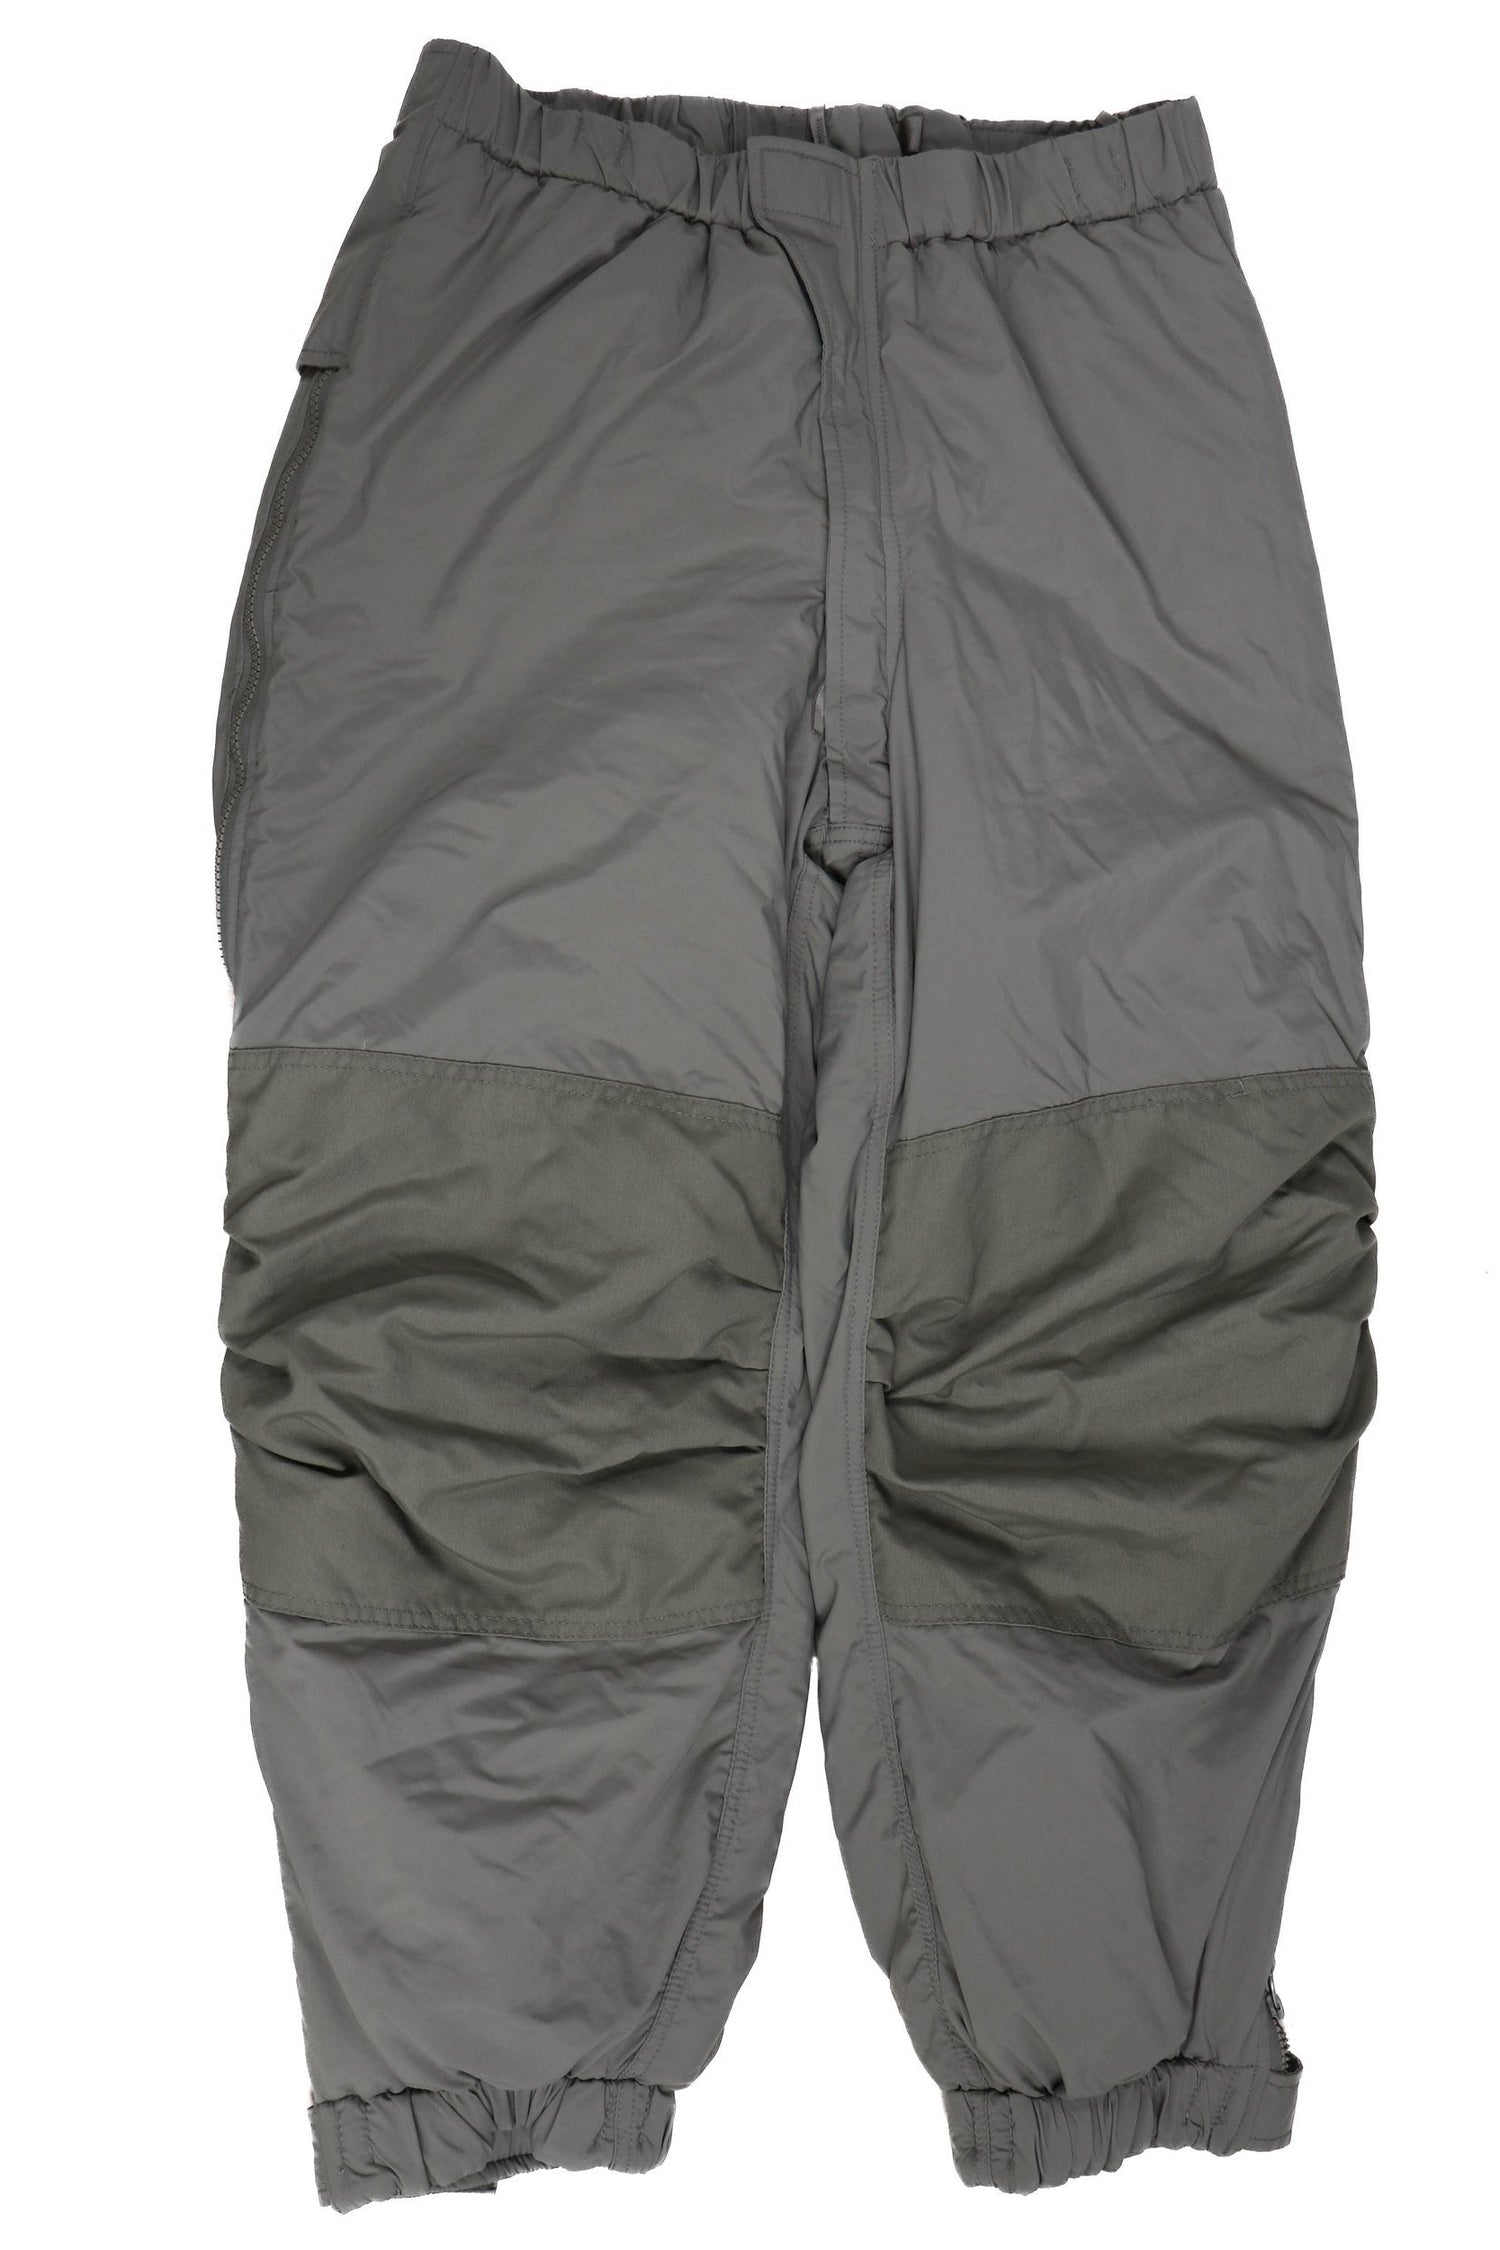 US Army ECWCS Level 7 Extreme Cold Weather Trousers